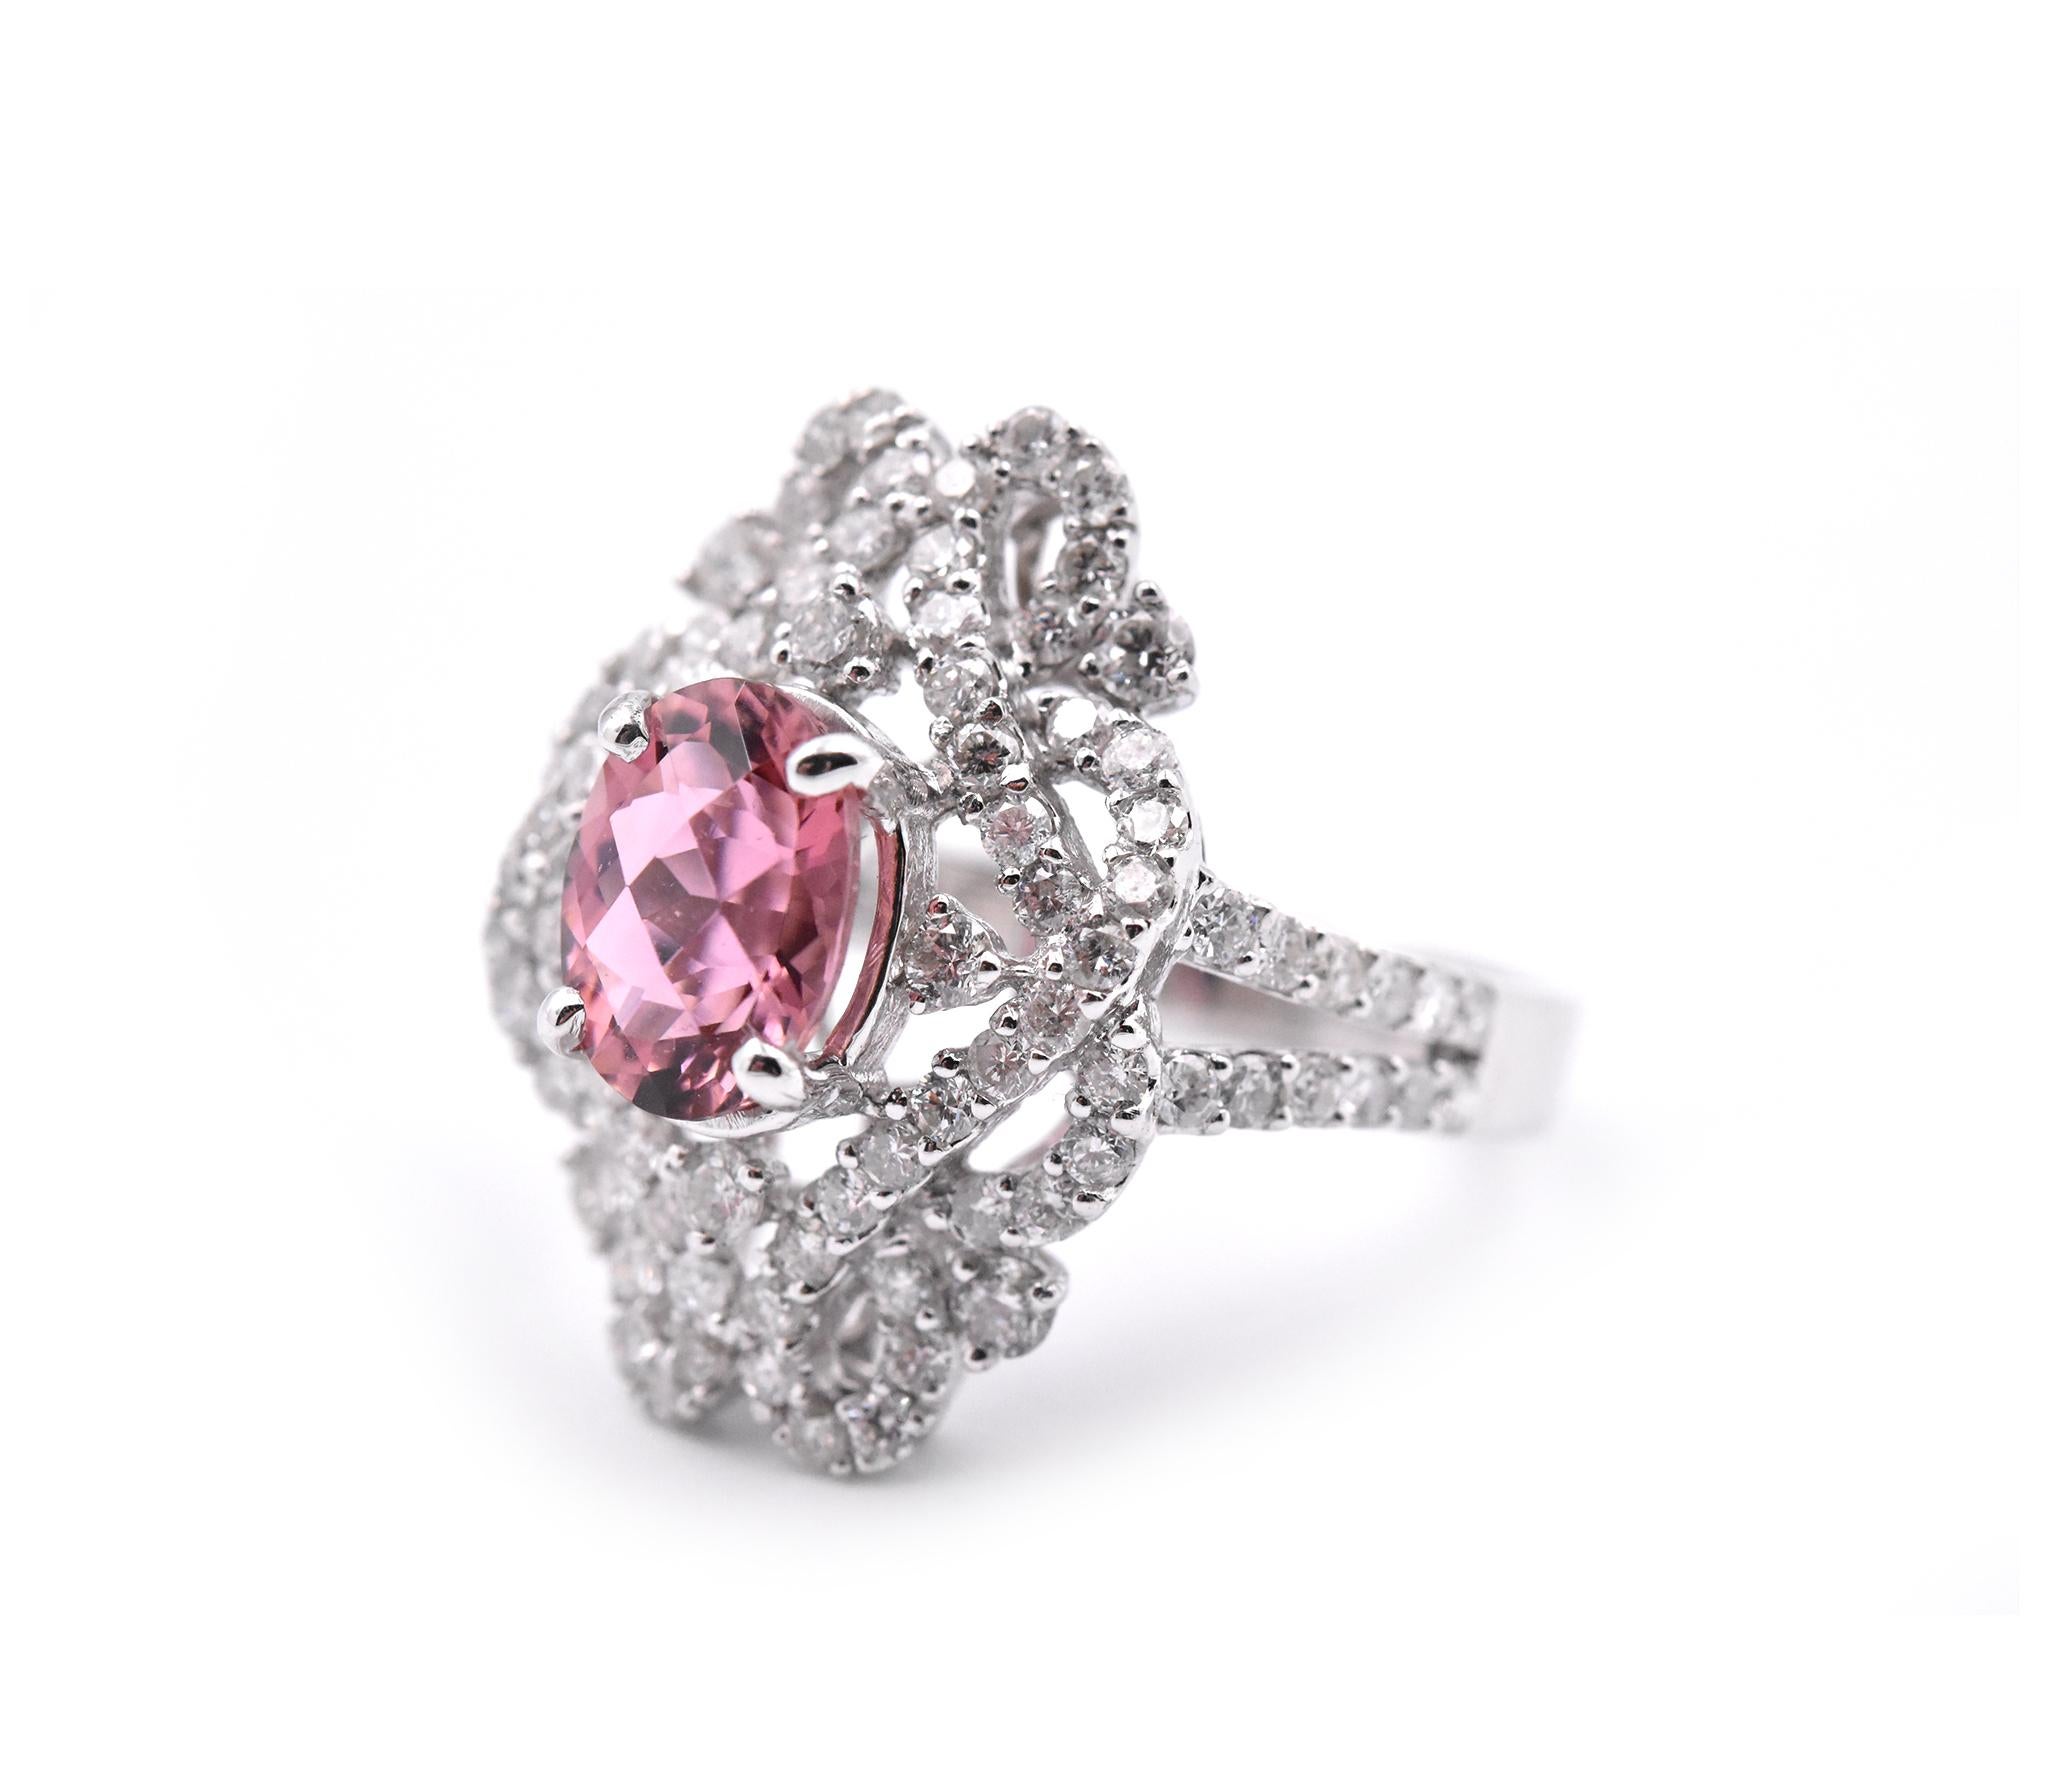 Designer: custom 
Material: 18k white gold
Gemstone: 1 oval cut pink tourmaline = 1.84ct
Diamonds: round brilliant cuts = 1.88cttw
Color: G-H
Clarity: VS2-SI1
Ring Size: 7 ¾ (please allow two additional shipping days for sizing requests)
Dimensions: